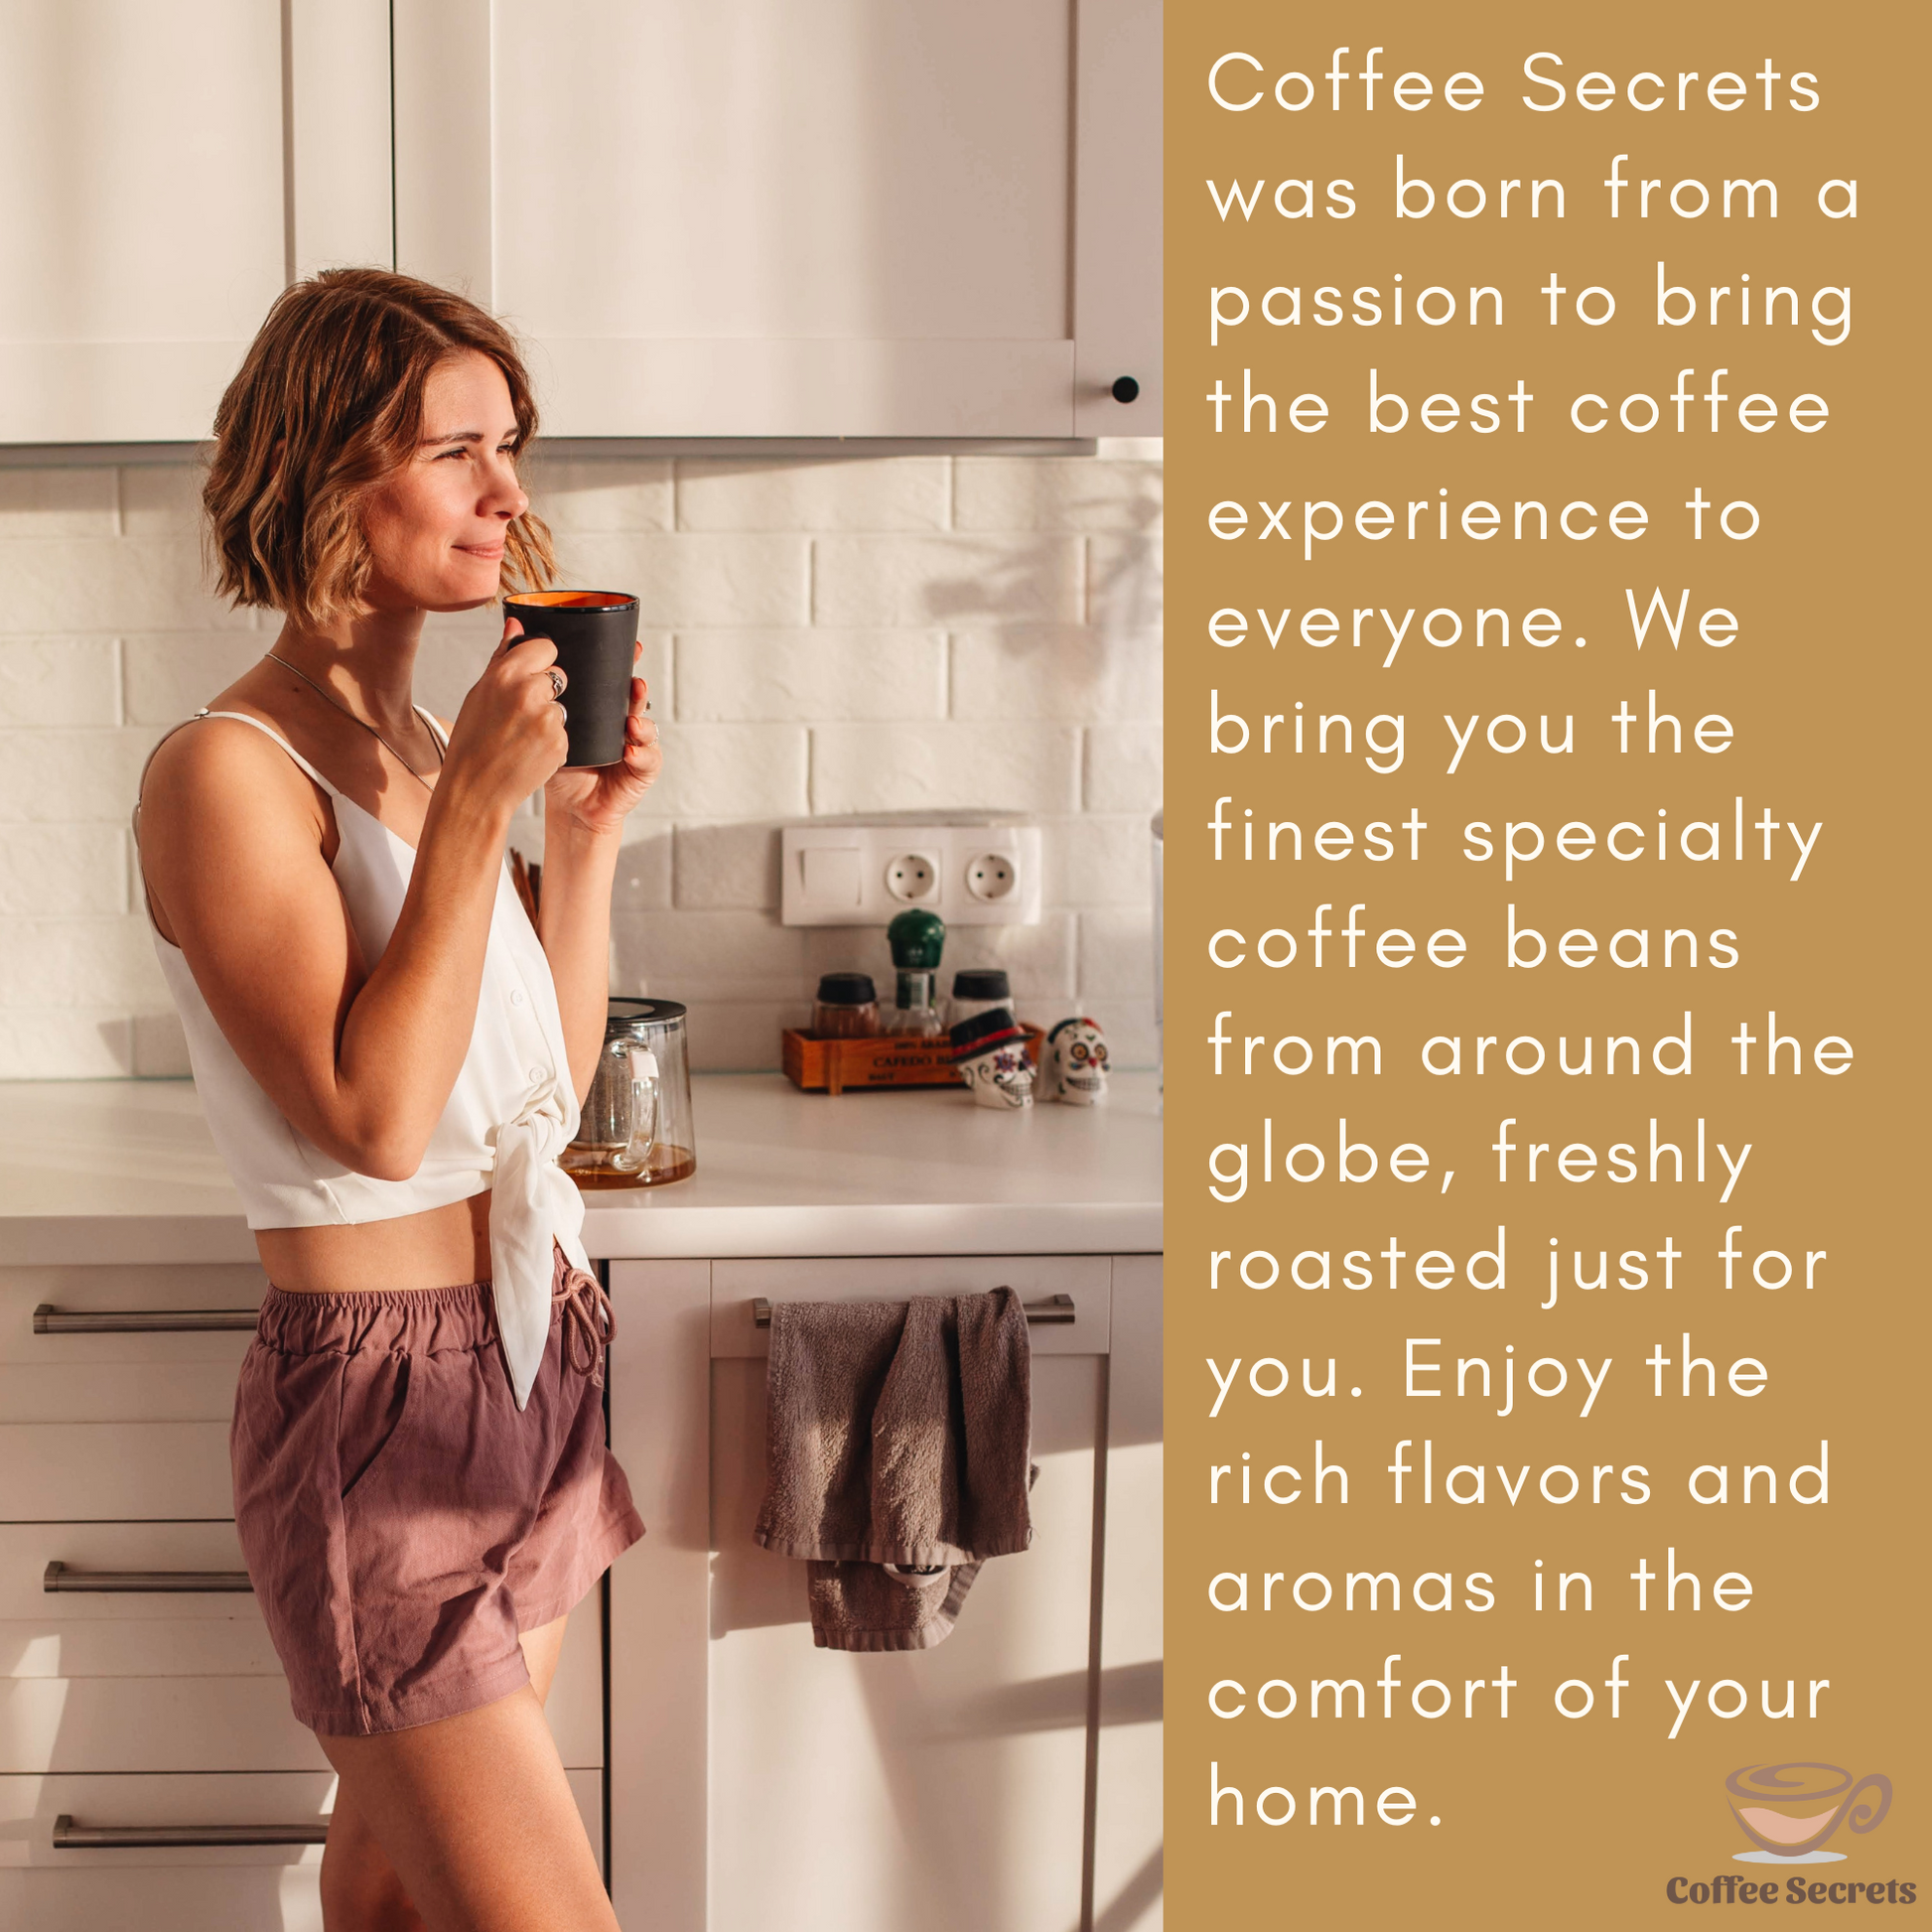 A woman enjoying a cup of coffee in a cozy kitchen setting. Text overlay reads: 'Coffee Secrets was born from a passion to bring the best coffee experience to everyone. We bring you the finest specialty coffee beans from around the globe, freshly roasted just for you. Enjoy the rich flavors and aromas in the comfort of your home.' Coffee Secrets logo is visible at the bottom right.